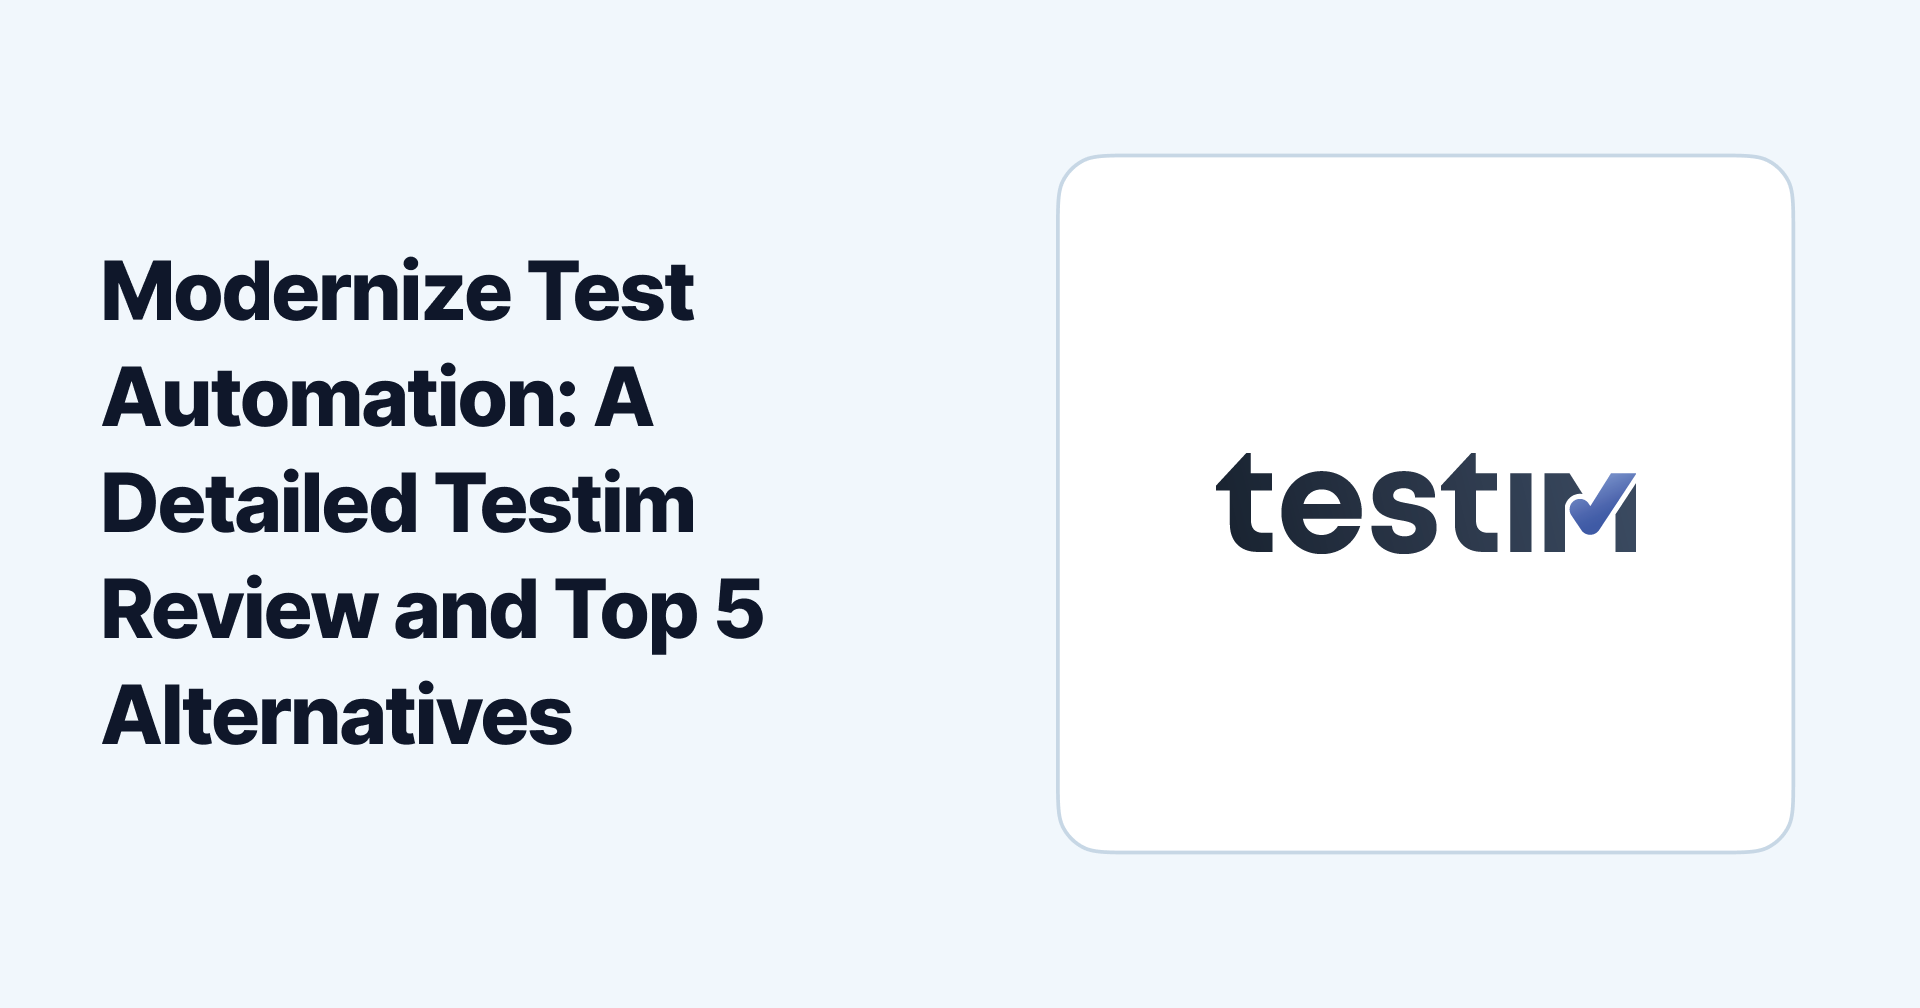 Modernize Test Automation: A Detailed Testim Review and Top 5 Alternatives